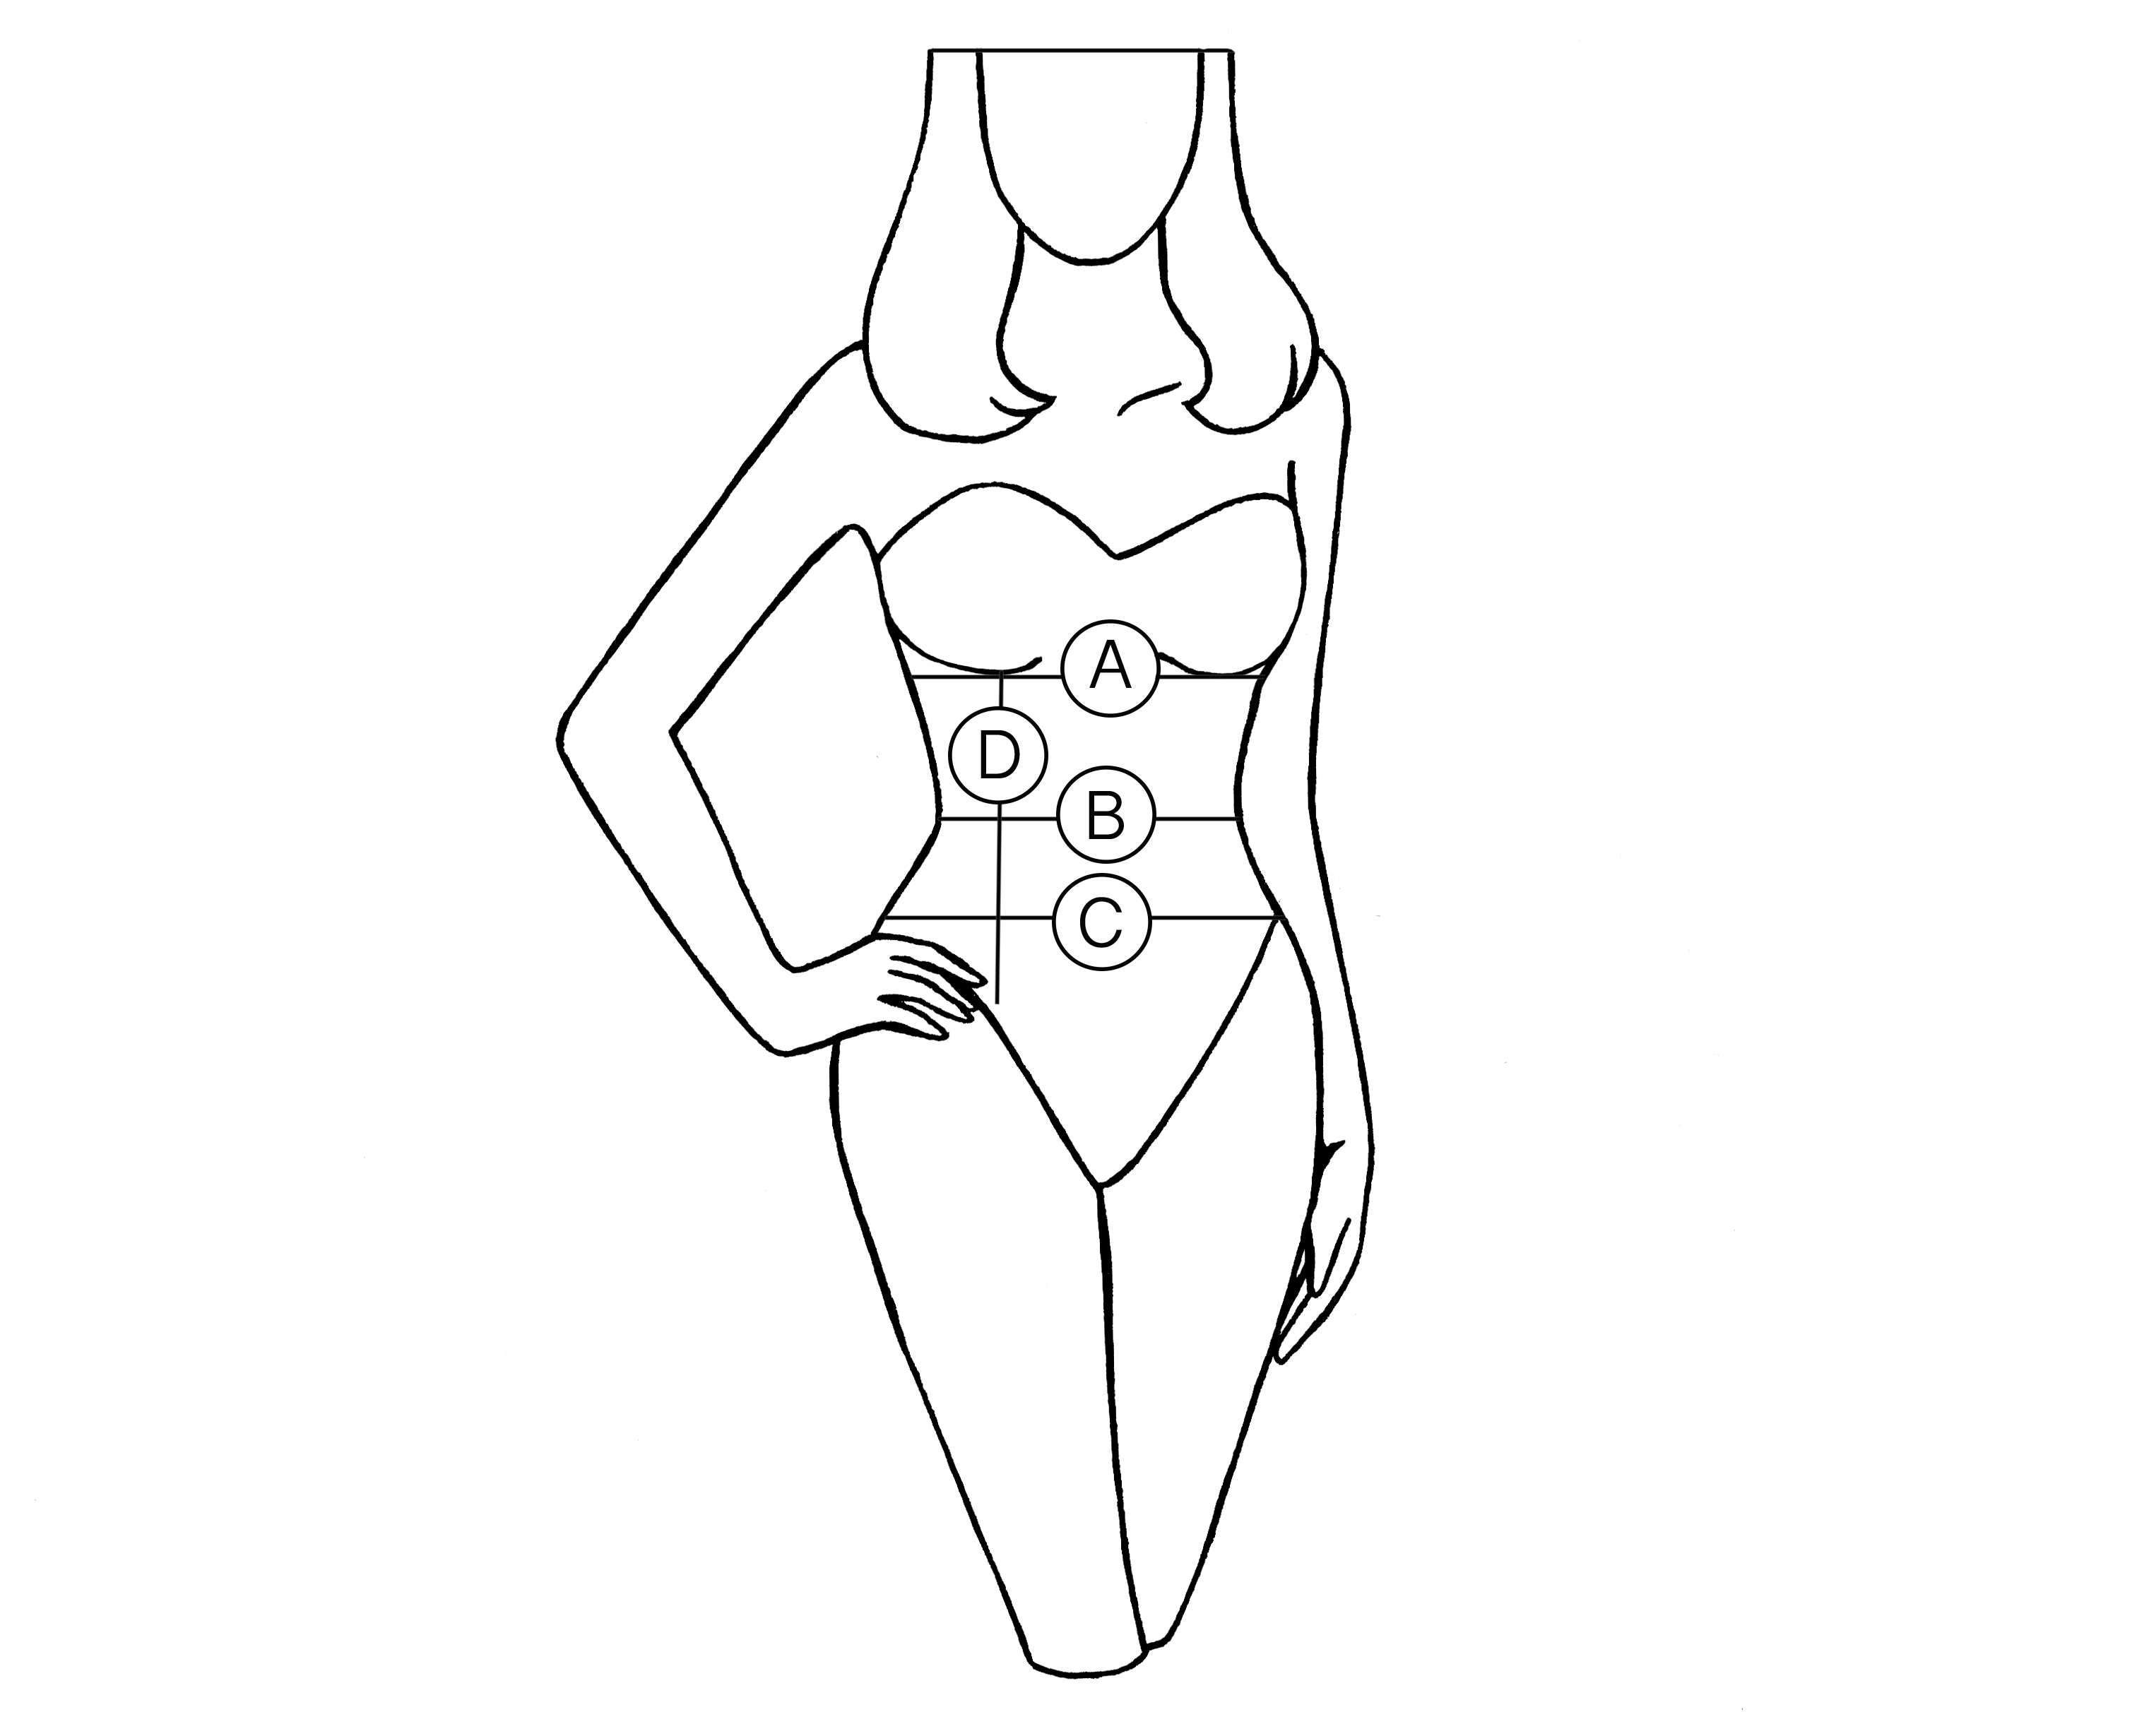 What Measurements Are Required to Customize Your Corset? – Bunny Corset